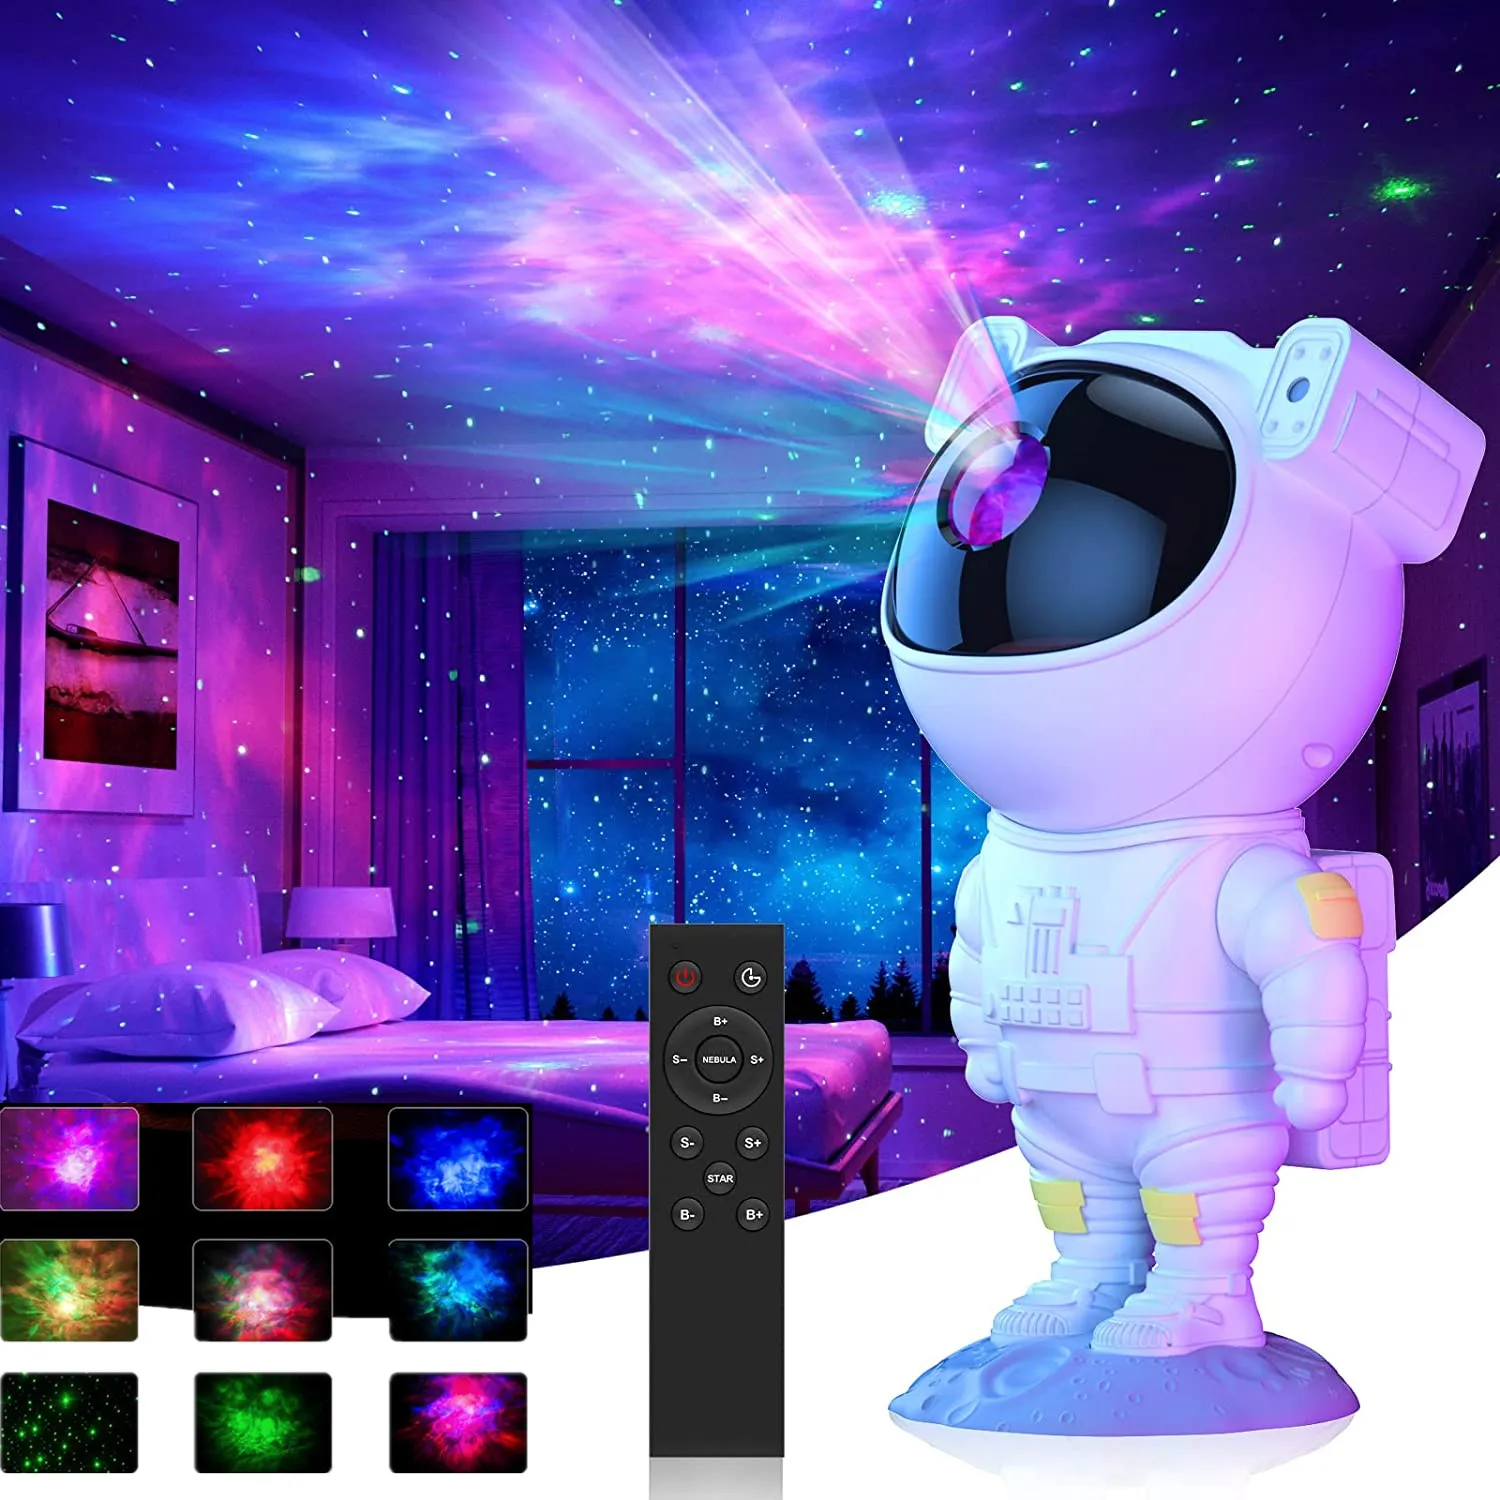 LED Galaxy Projector Night Lights with Remote Astronaut Starry Sky Projection Lamp for Children Adult Gift Home Room Decoration